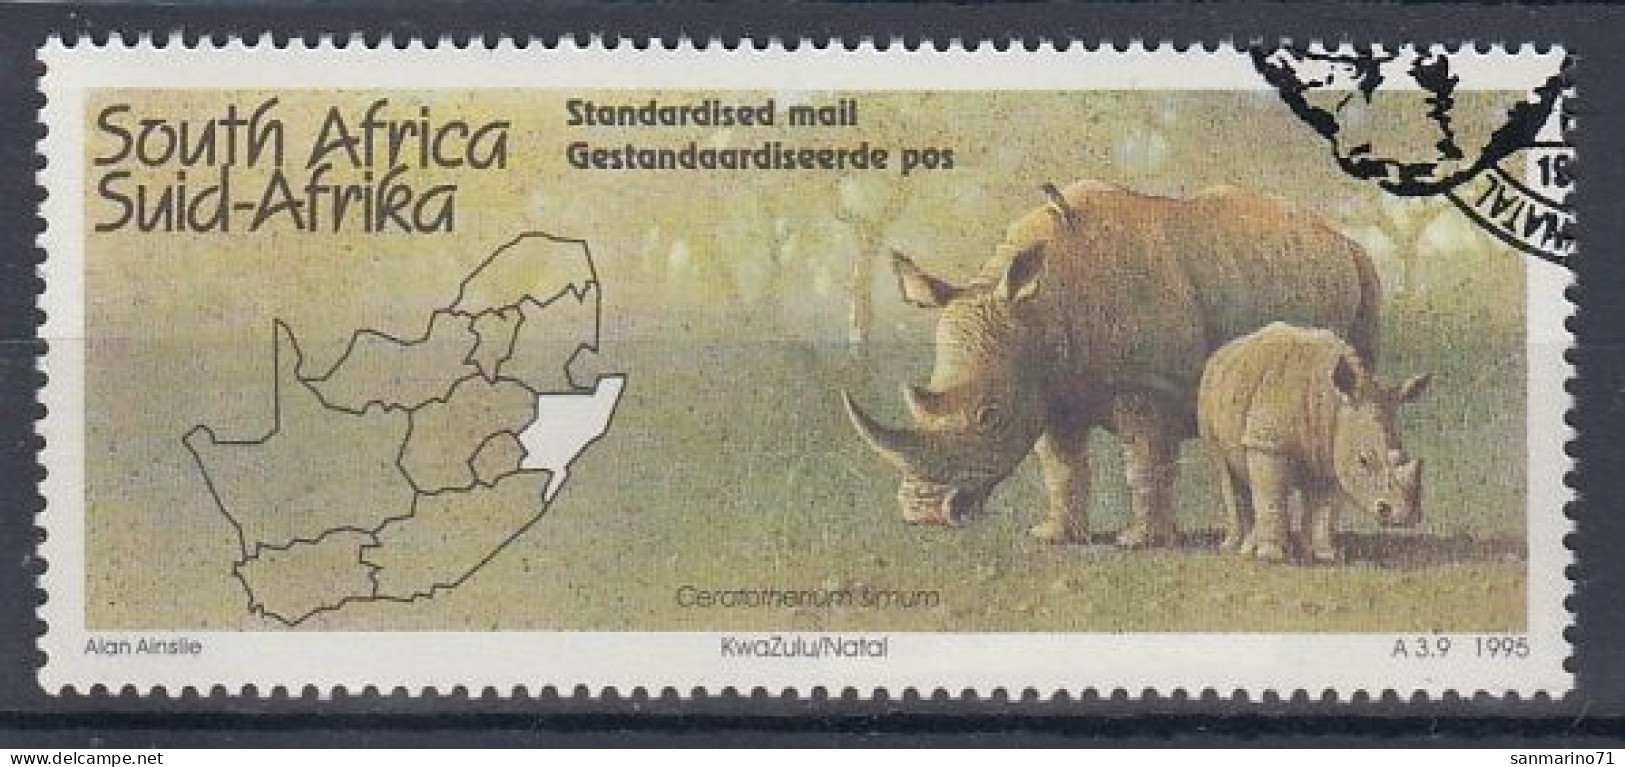 SOUTH AFRICA 954,used - Usati